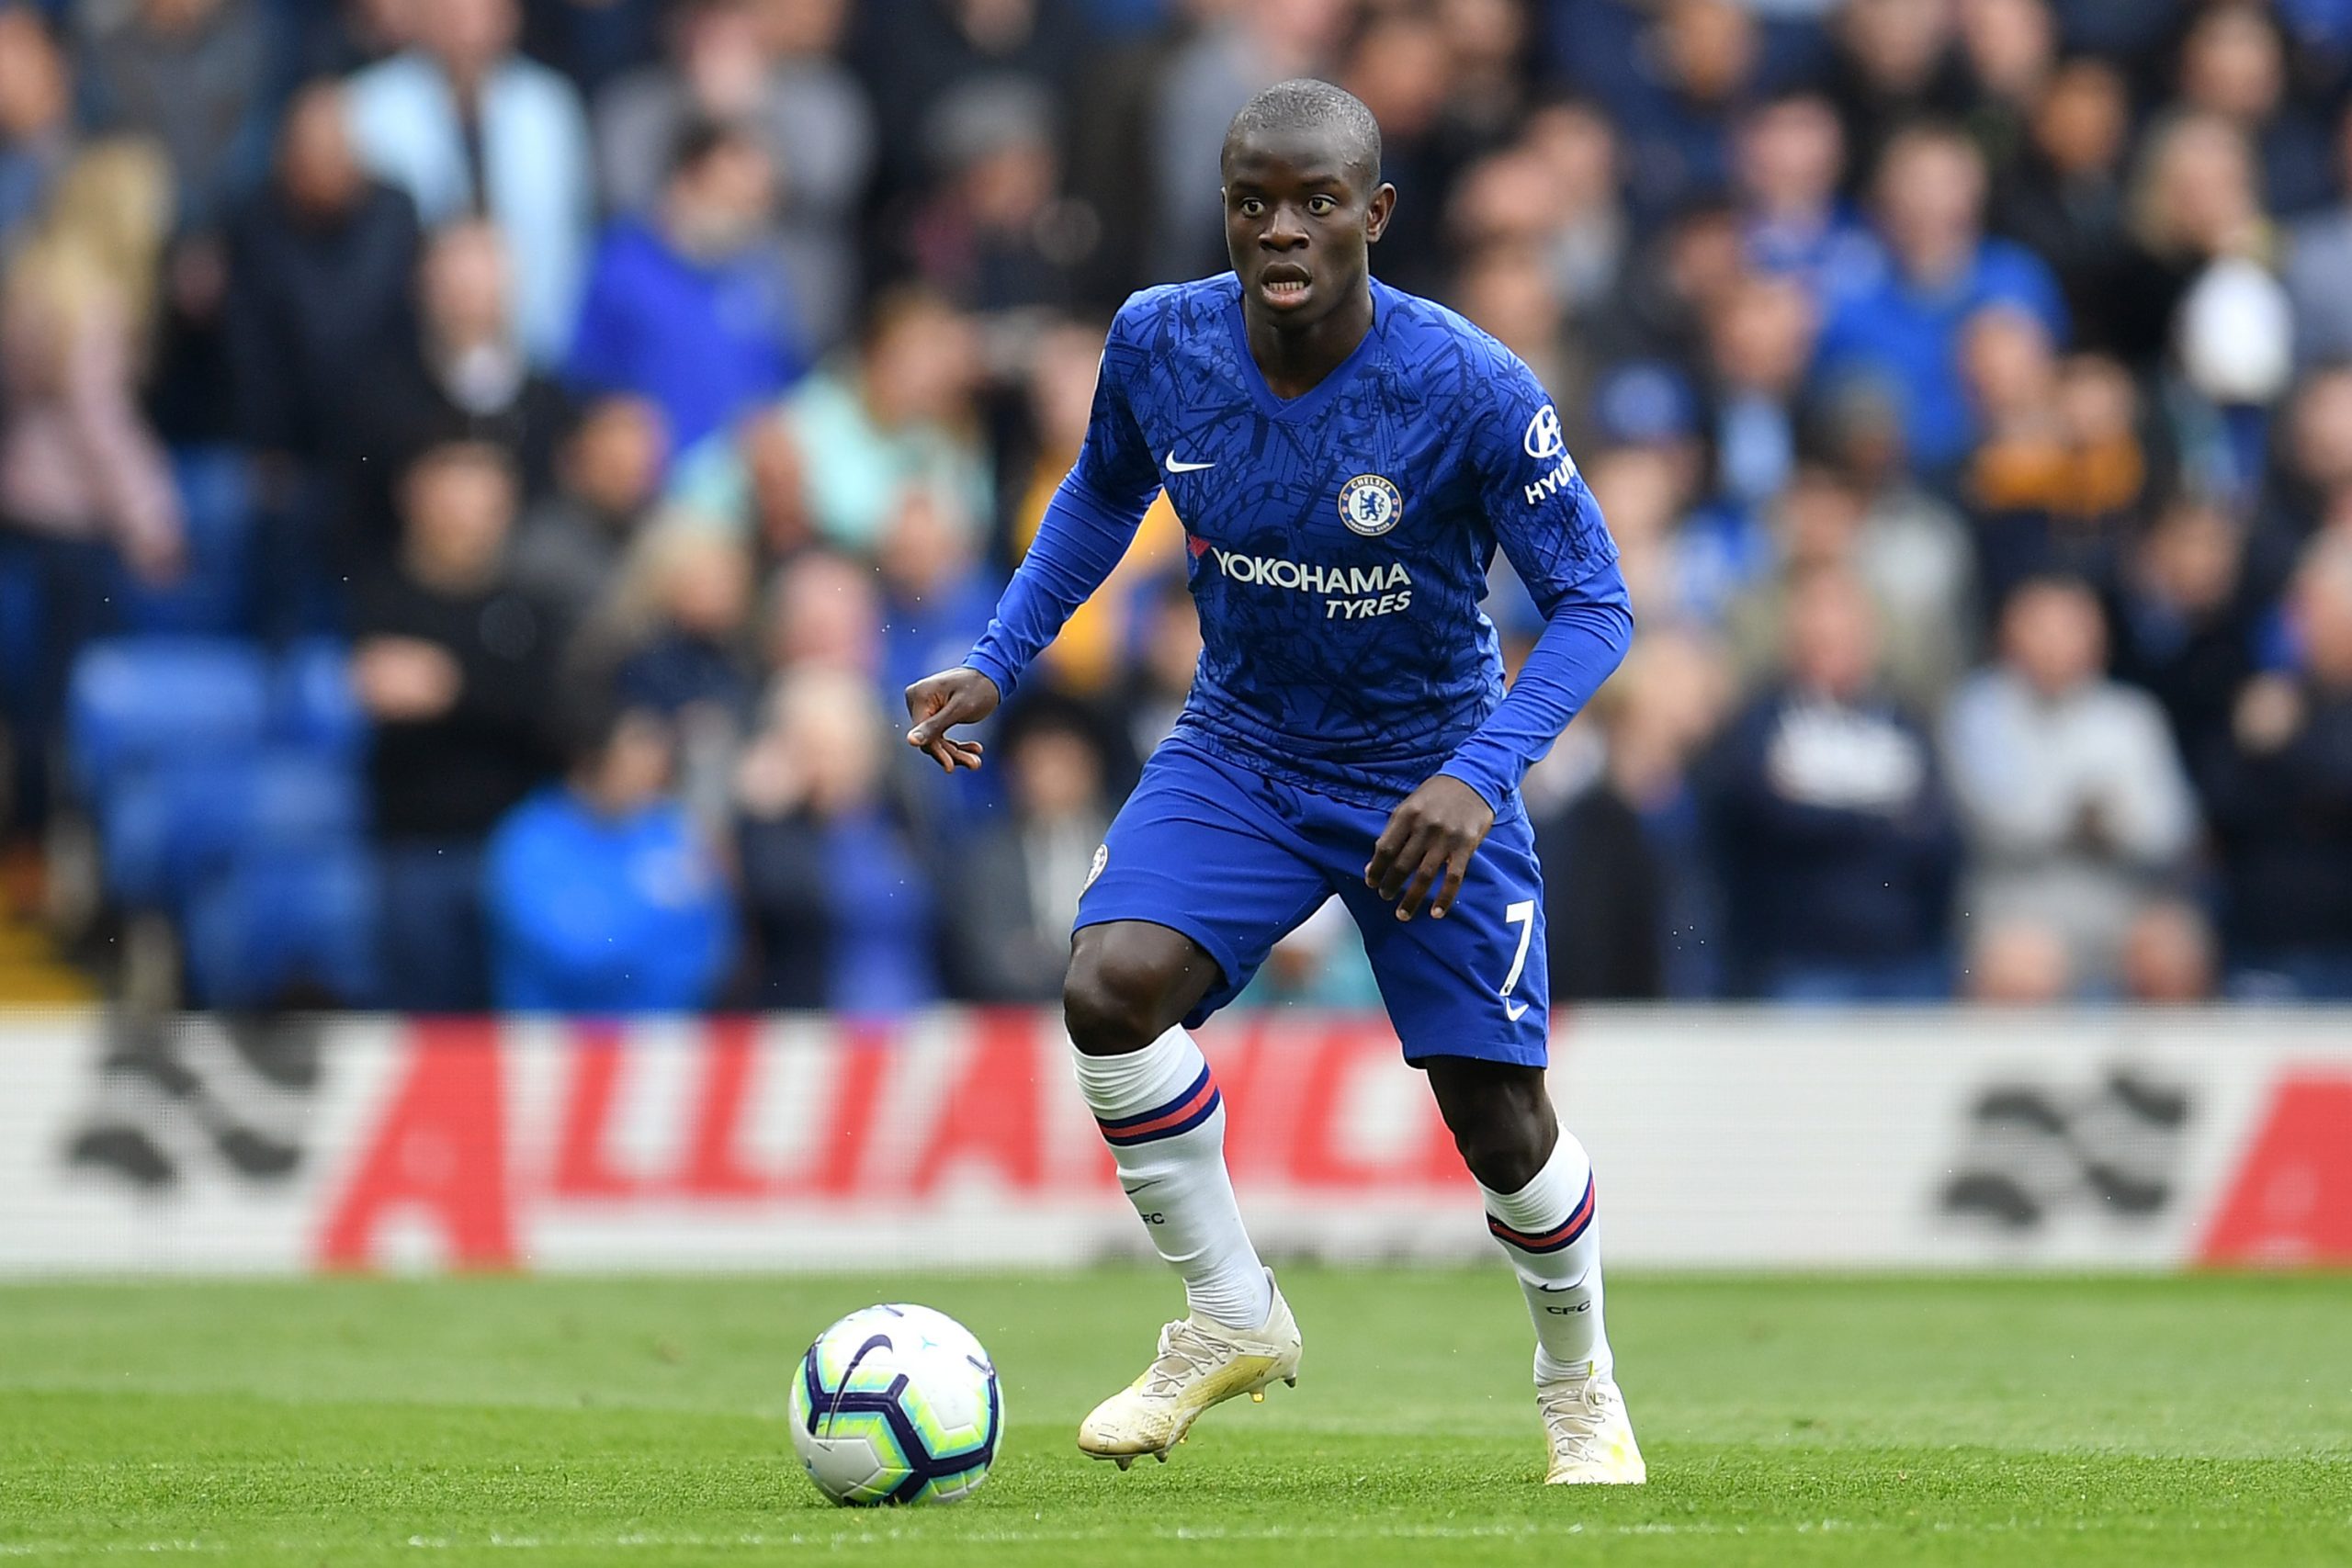  N'Golo Kante is playing soccer for Chelsea, wearing a blue jersey with white sleeves and blue shorts, with the ball at his feet.